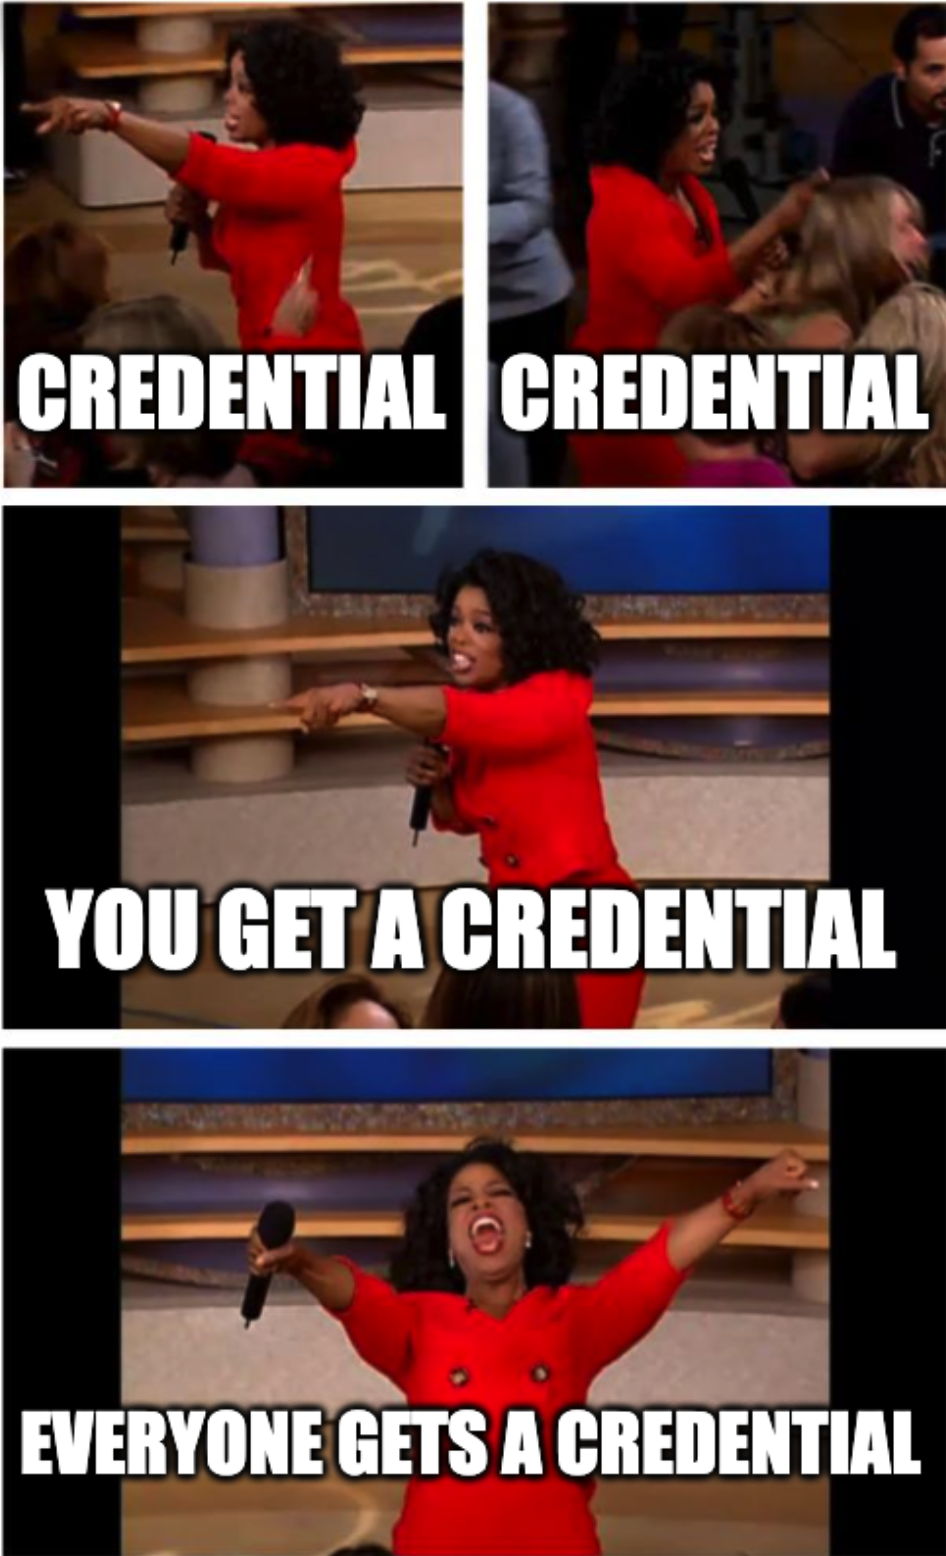 meme — Oprah giving away credentials to everyone